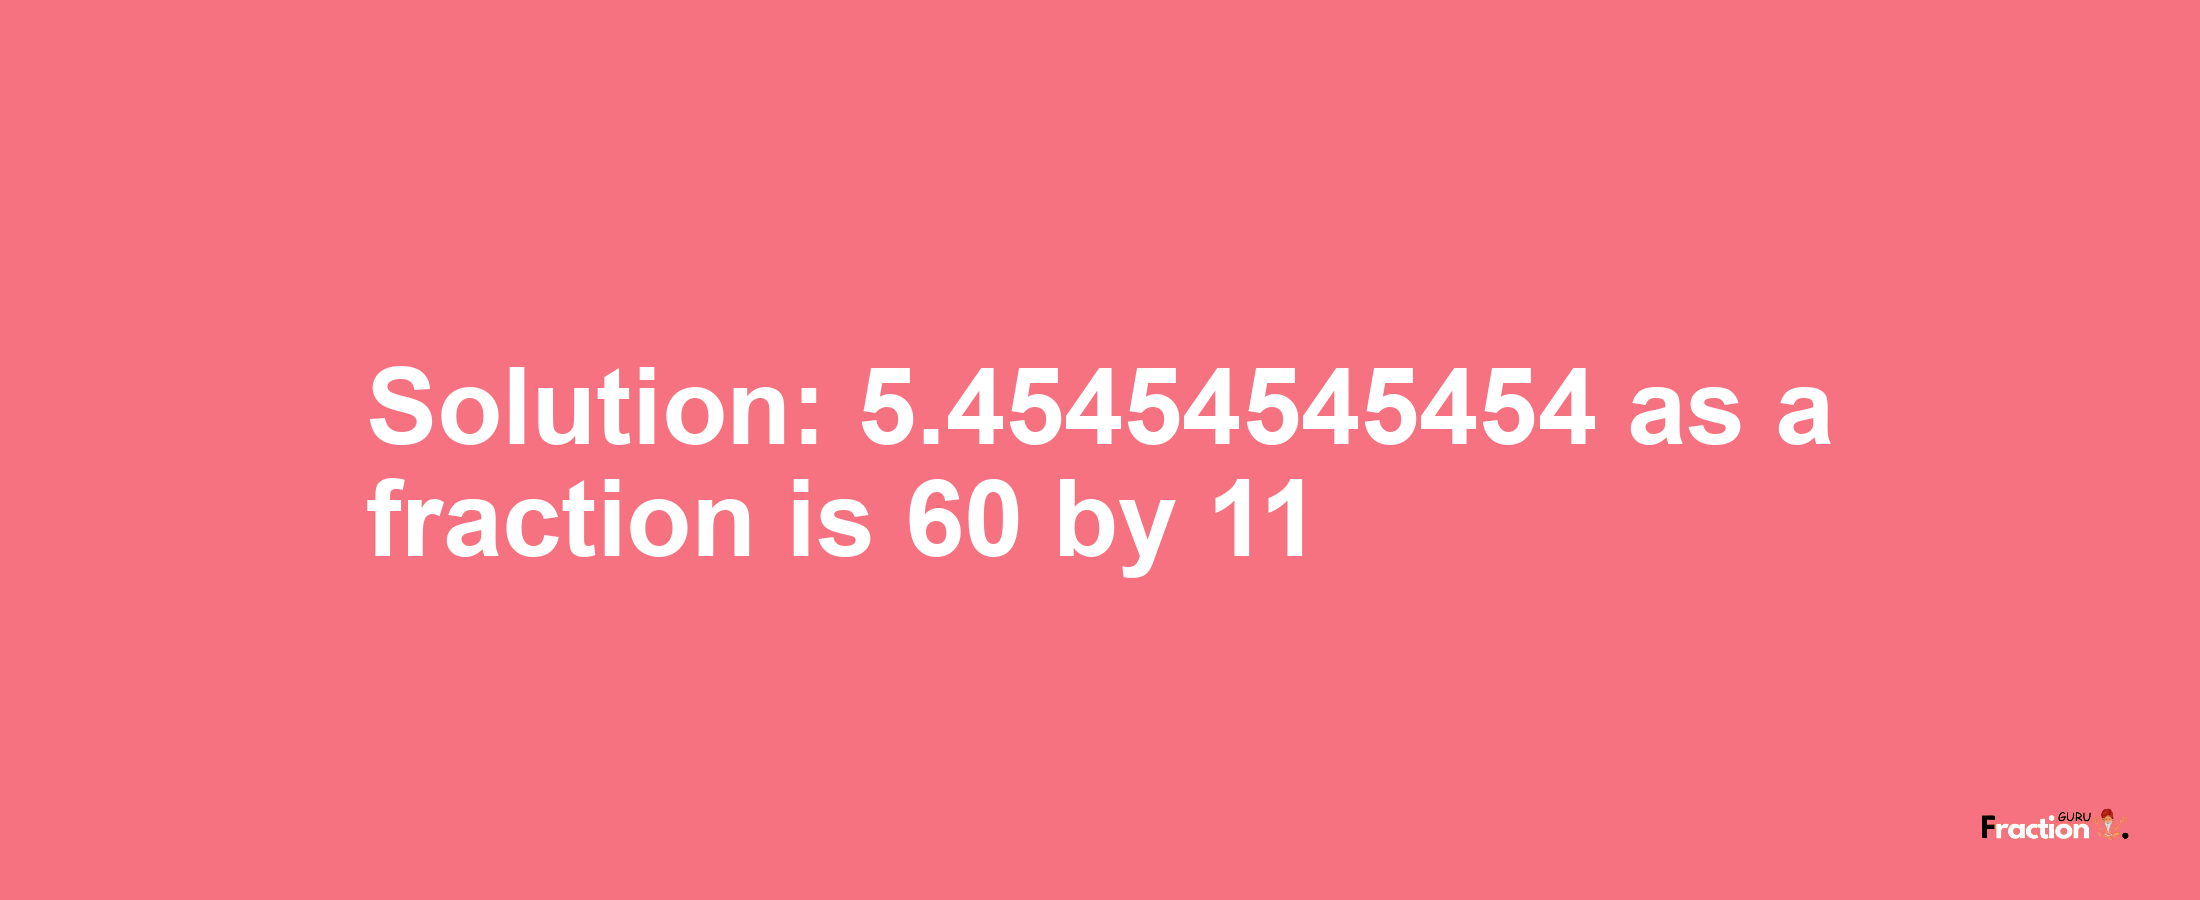 Solution:5.45454545454 as a fraction is 60/11